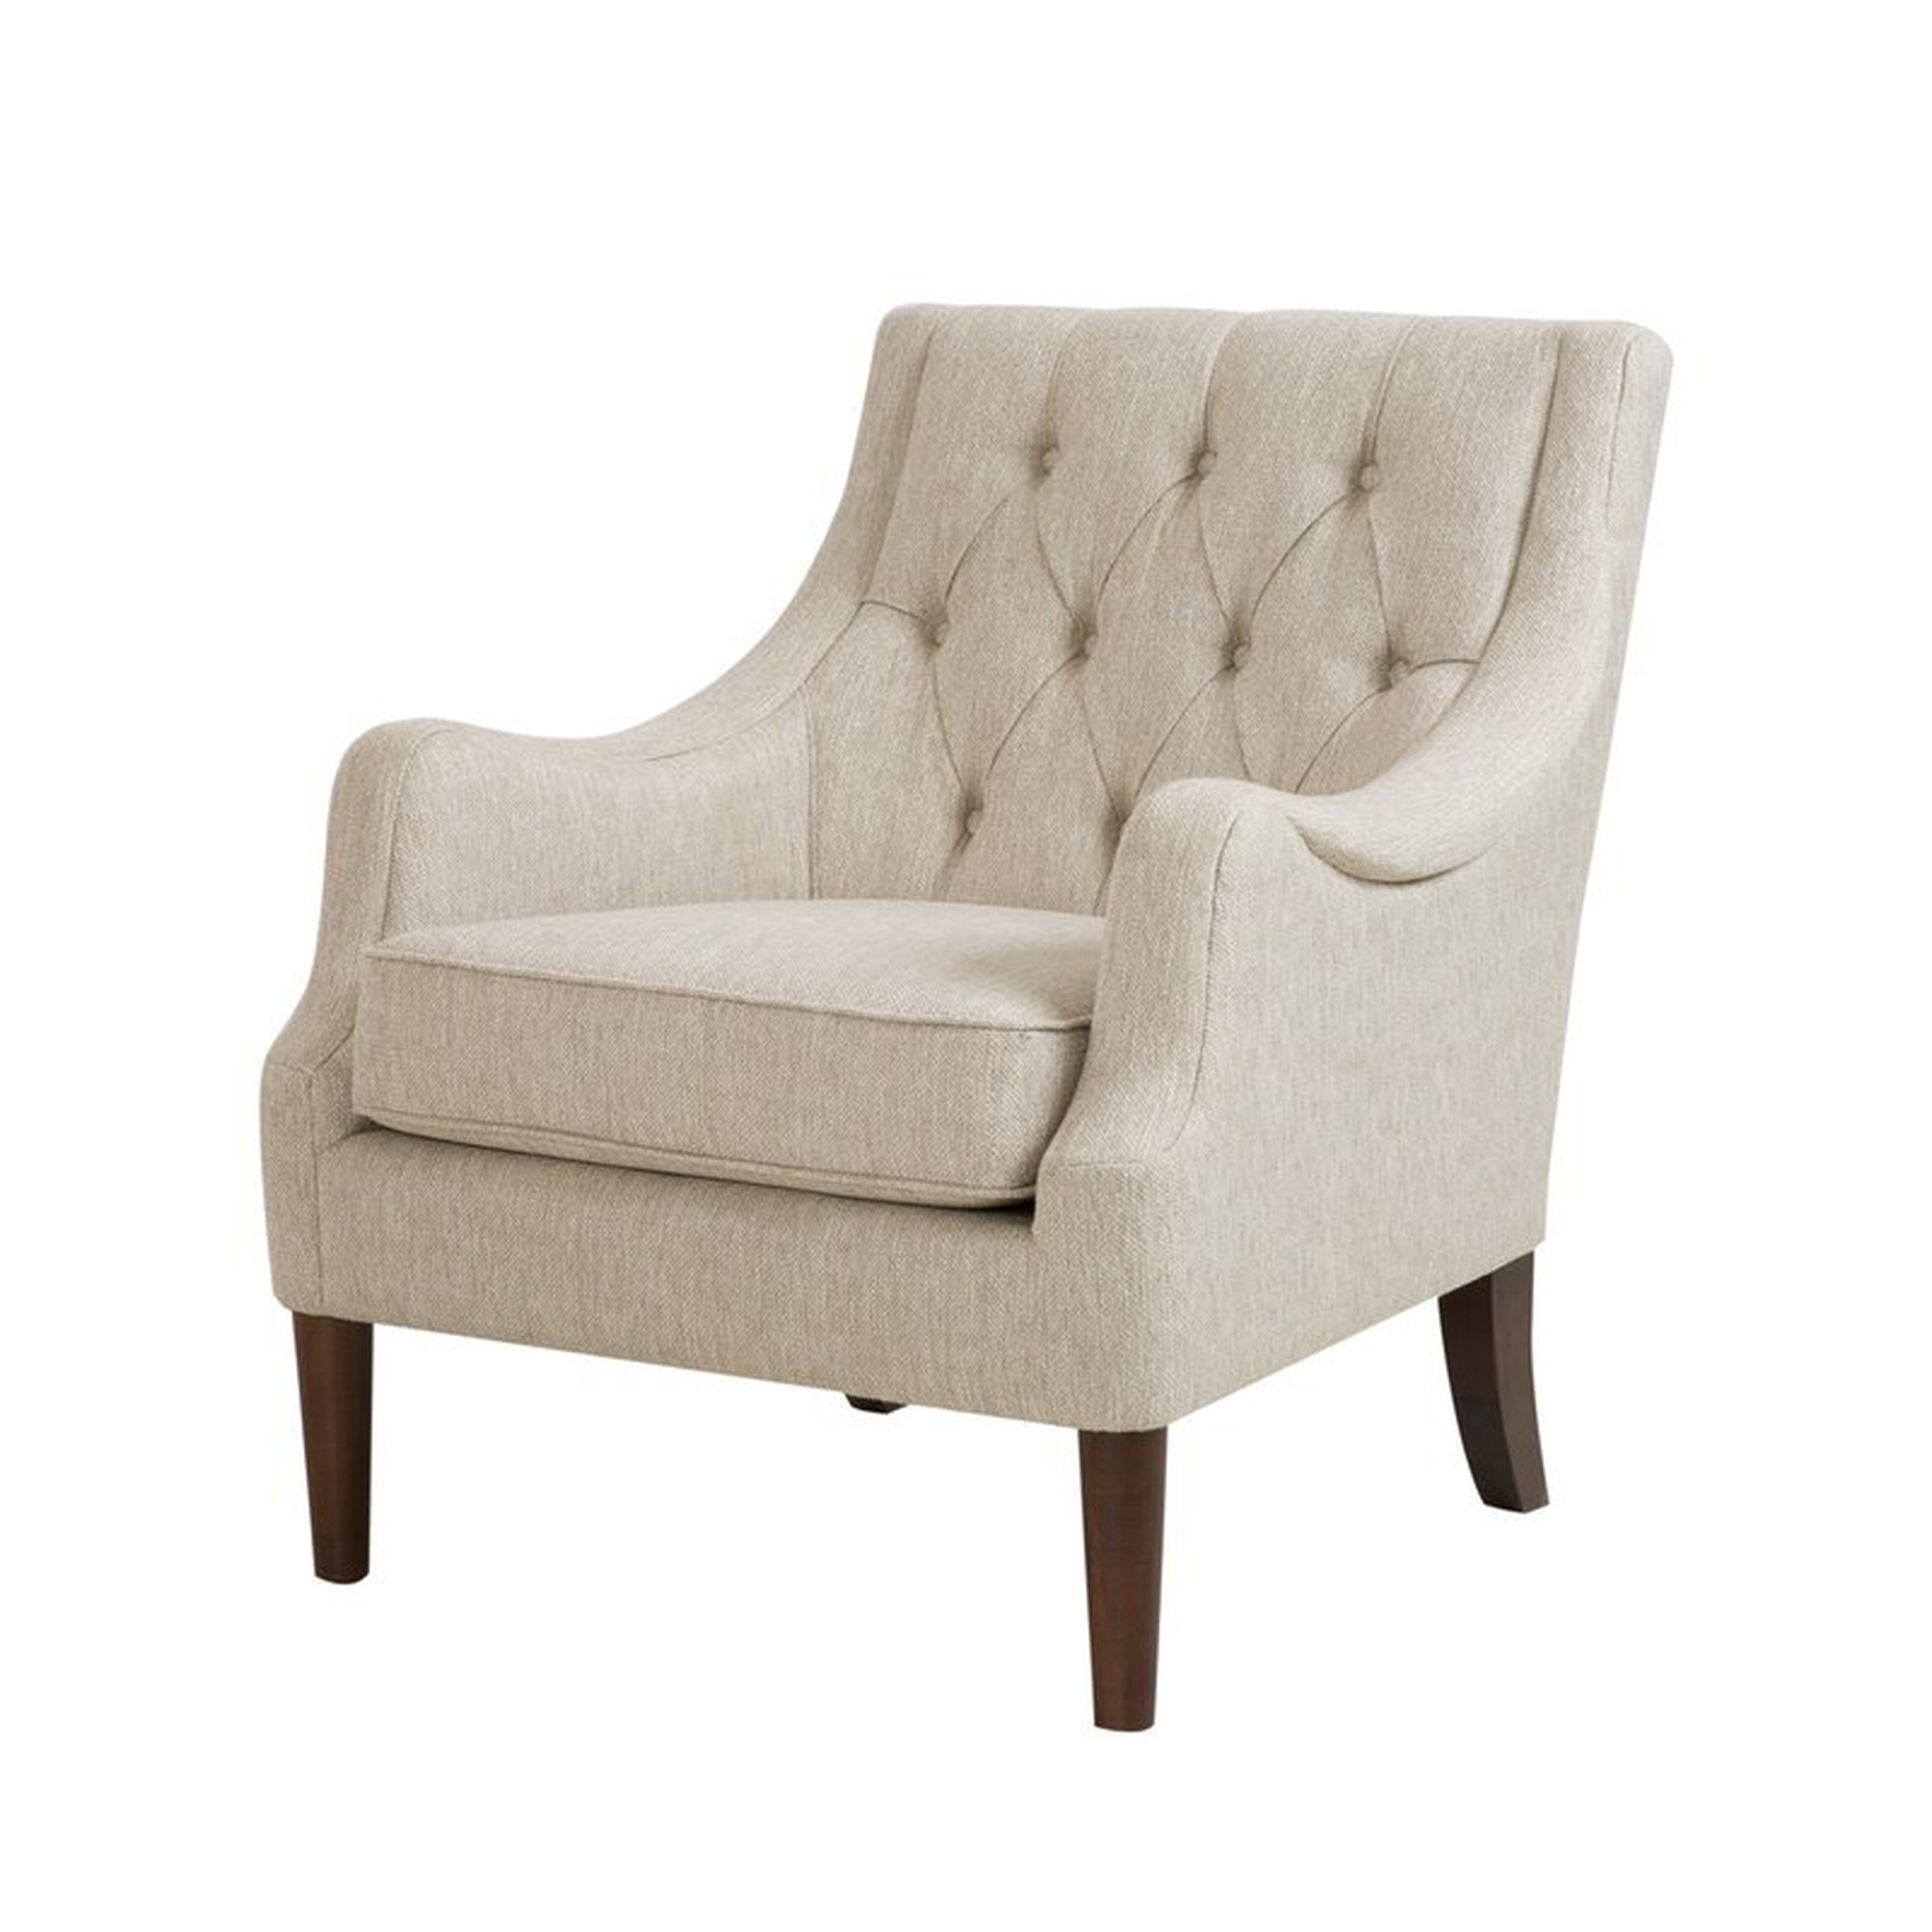 Galesville 29.25'' Wide Tufted Wingback Chai - Wayfair